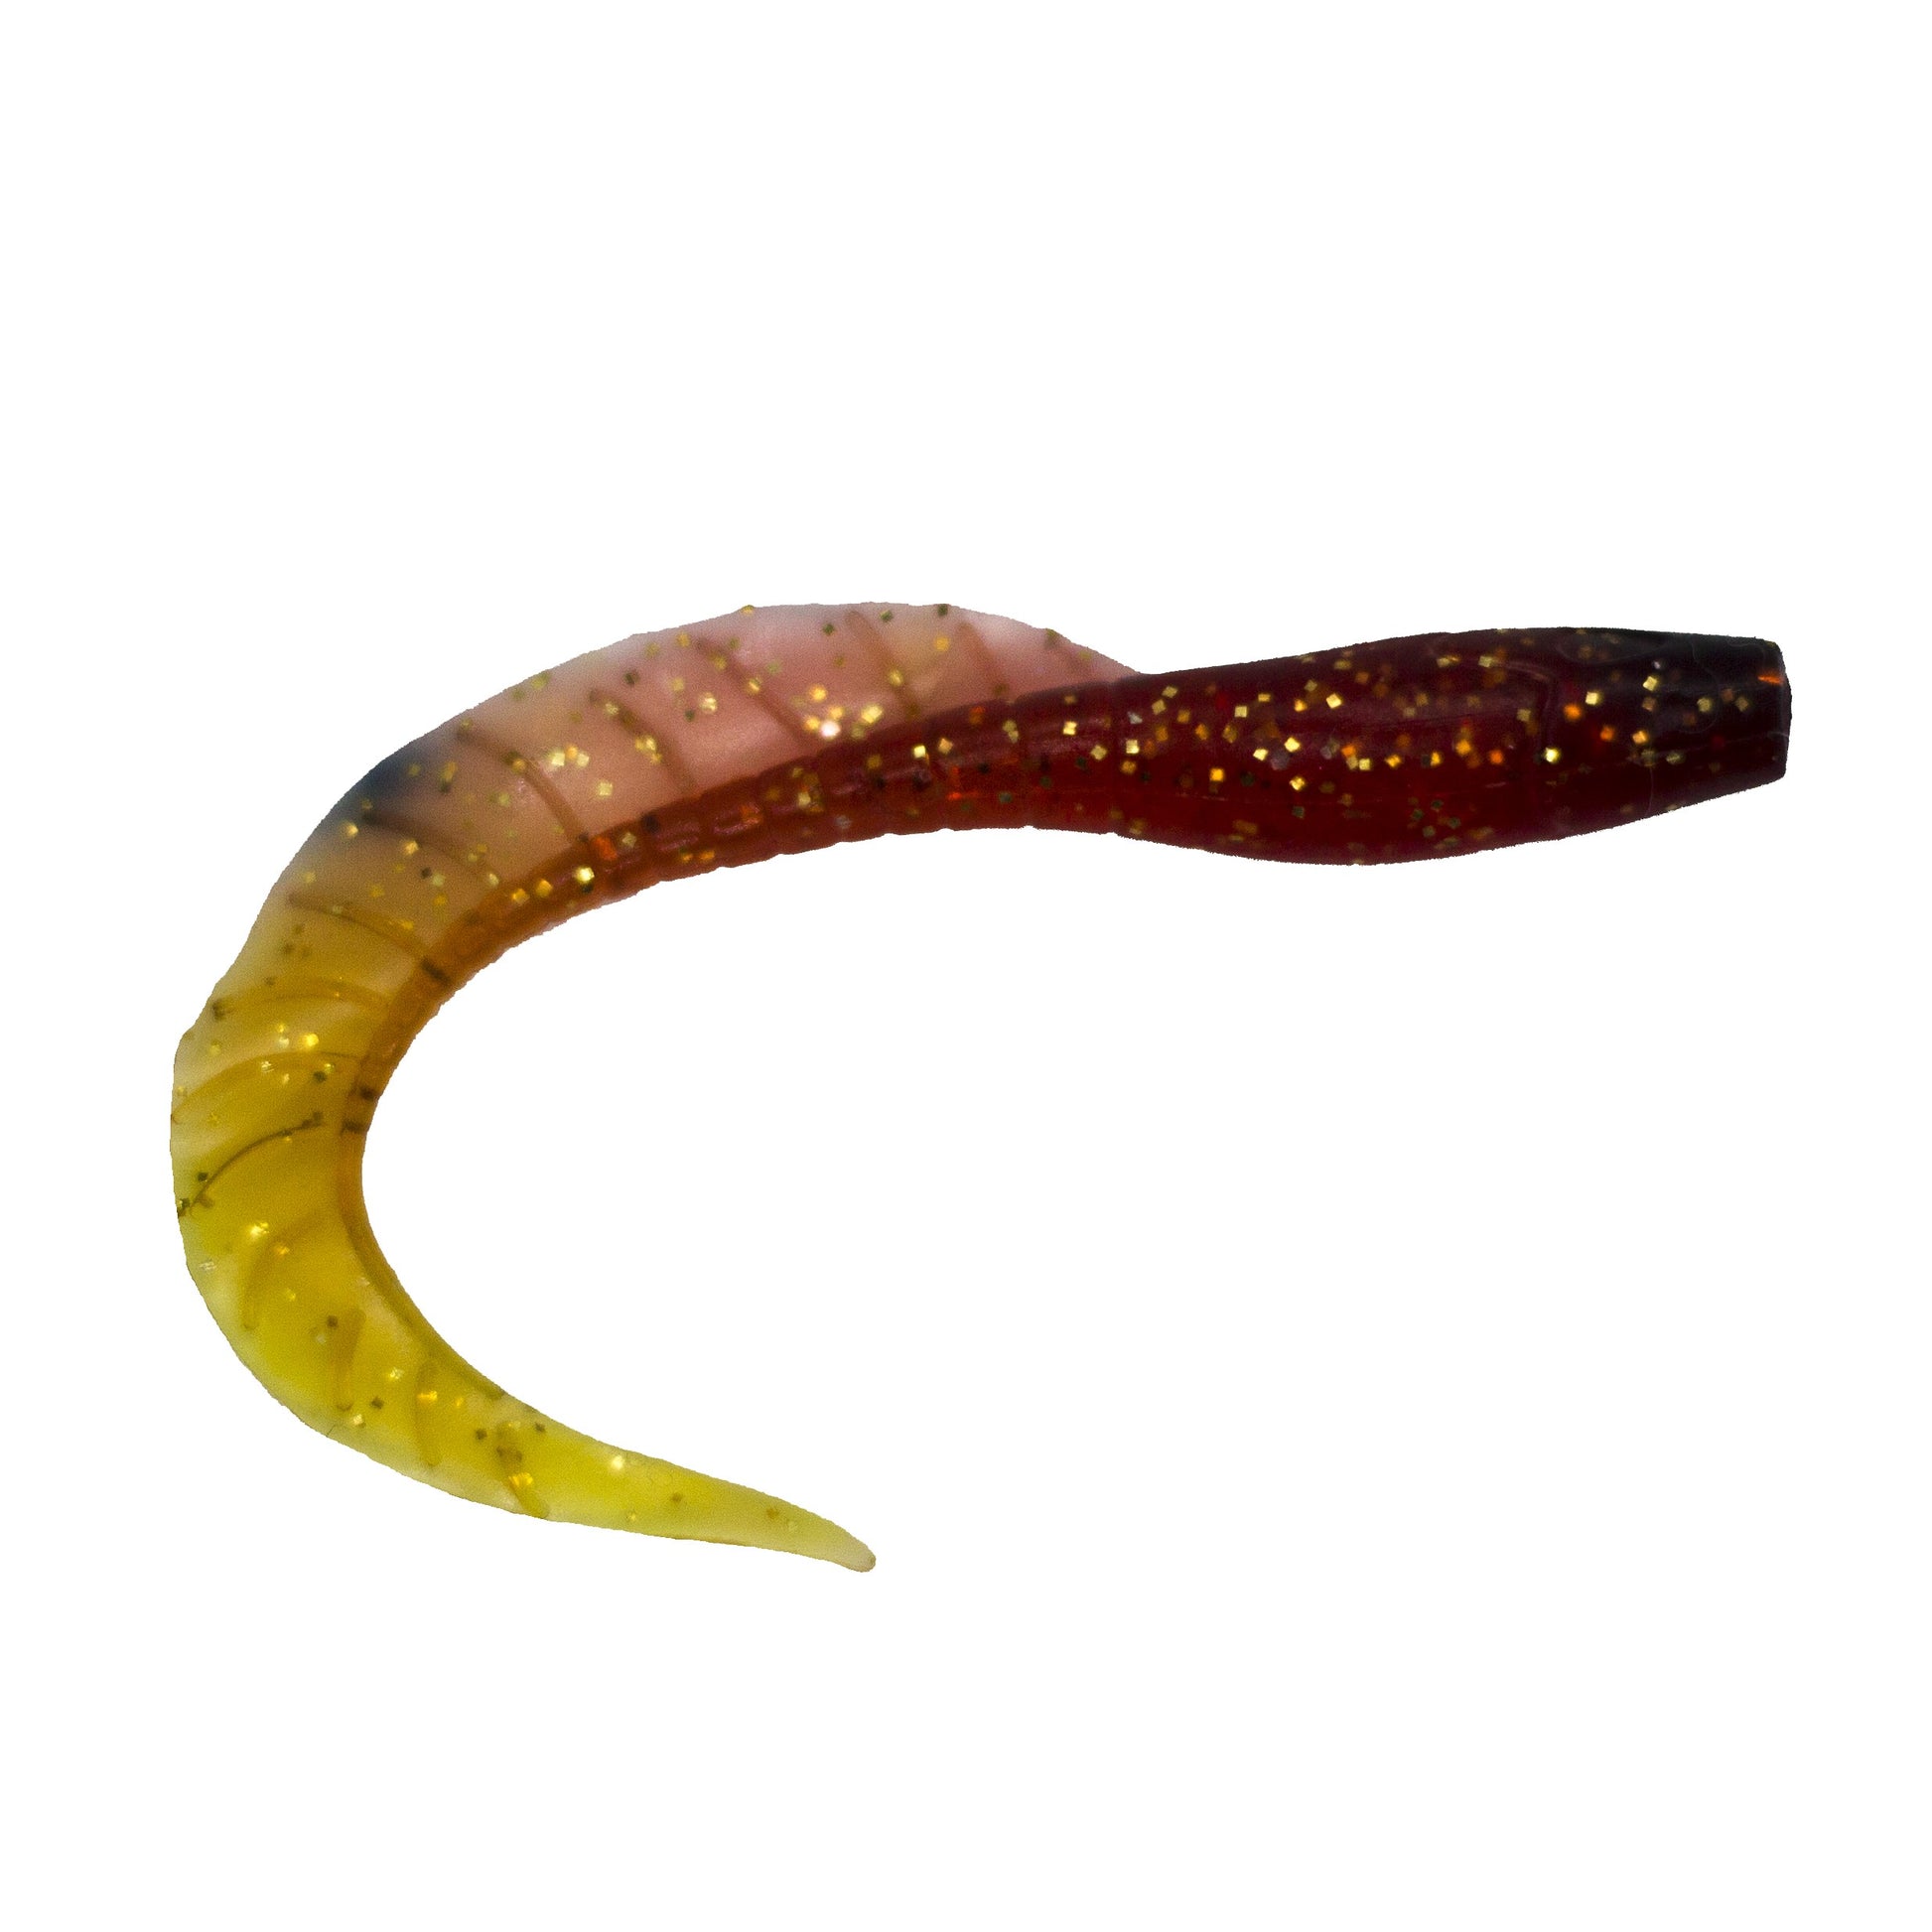 Fishing Depot Curl Tail Eel Twister, 2.5-in - Discount Fishing Tackle -  Soft Bait